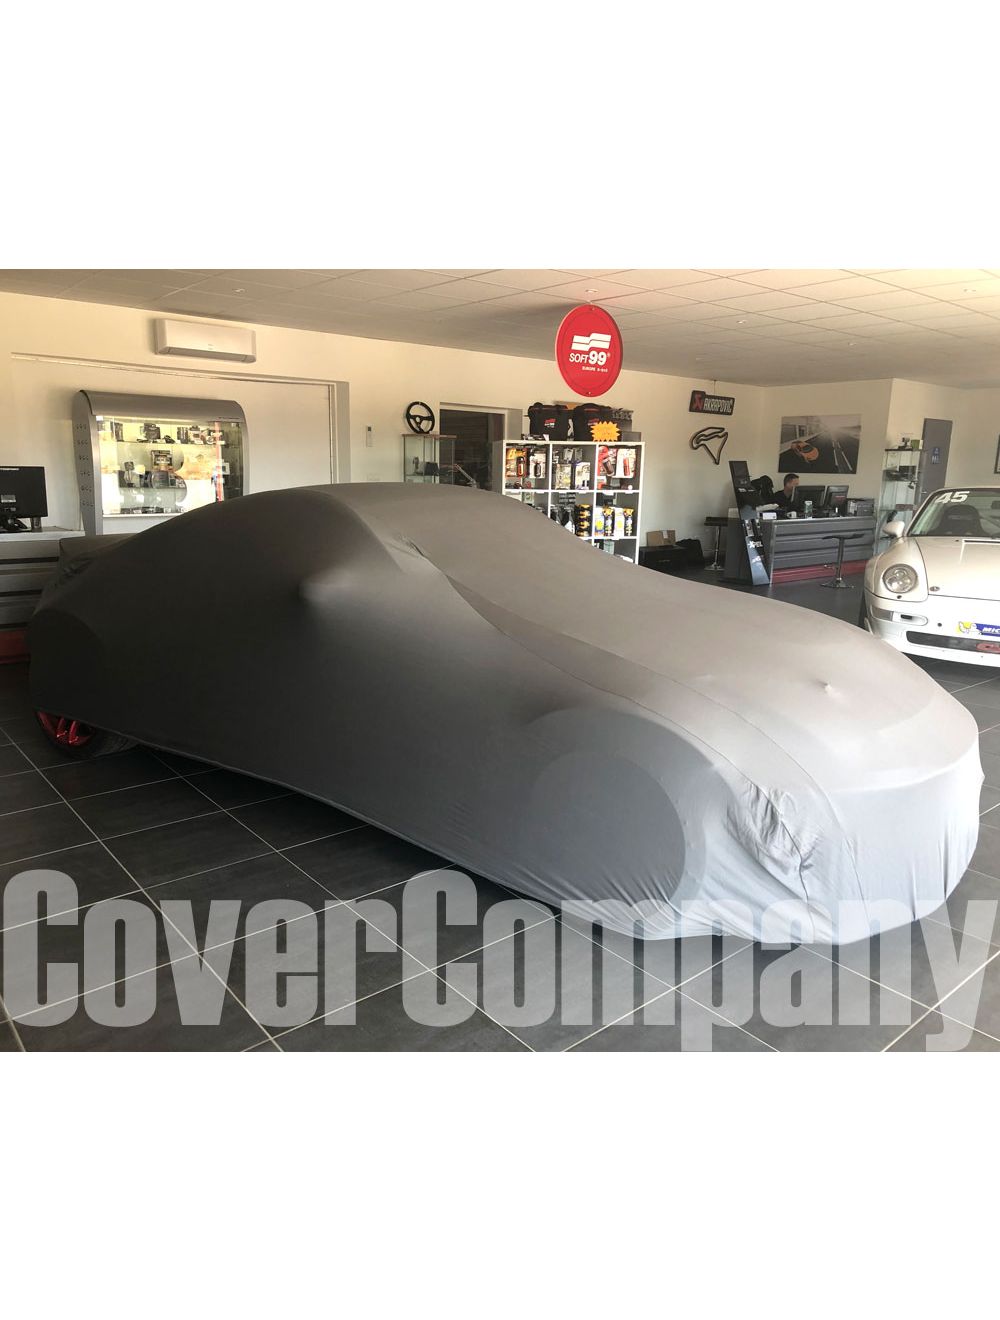 Perfect Fit Nissan Car Cover - Indoor Silver Range